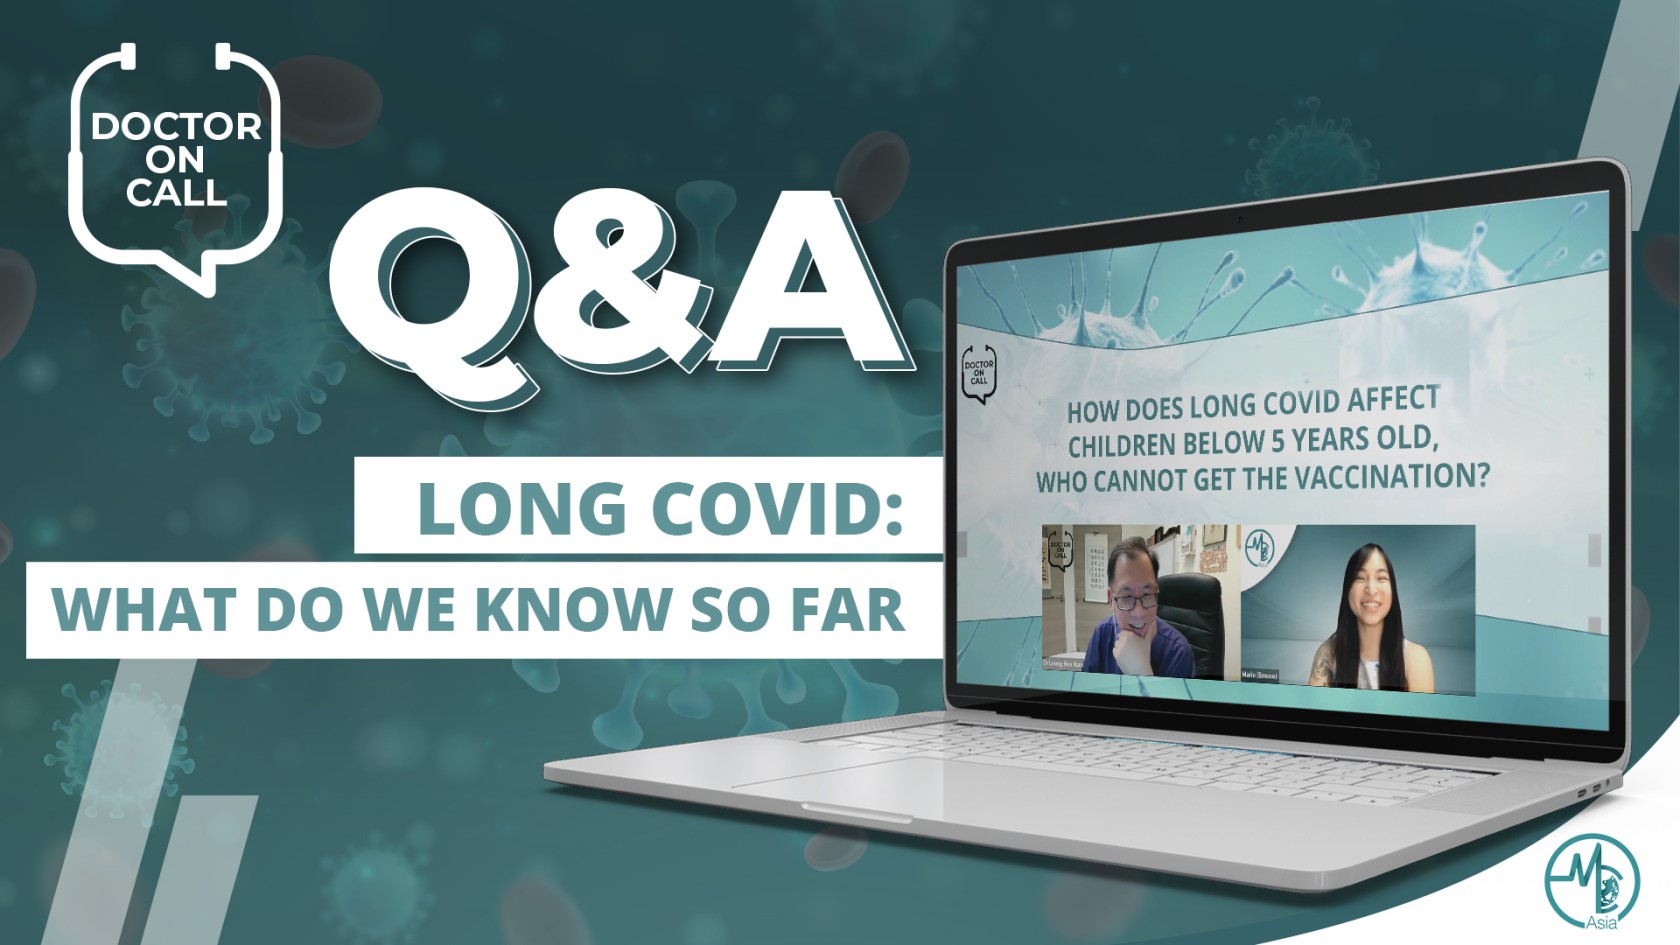 Doctor On Call (DOC): Dr Leong Hoe Nam on Long COVID – What Do We Know So Far? (Part 2)